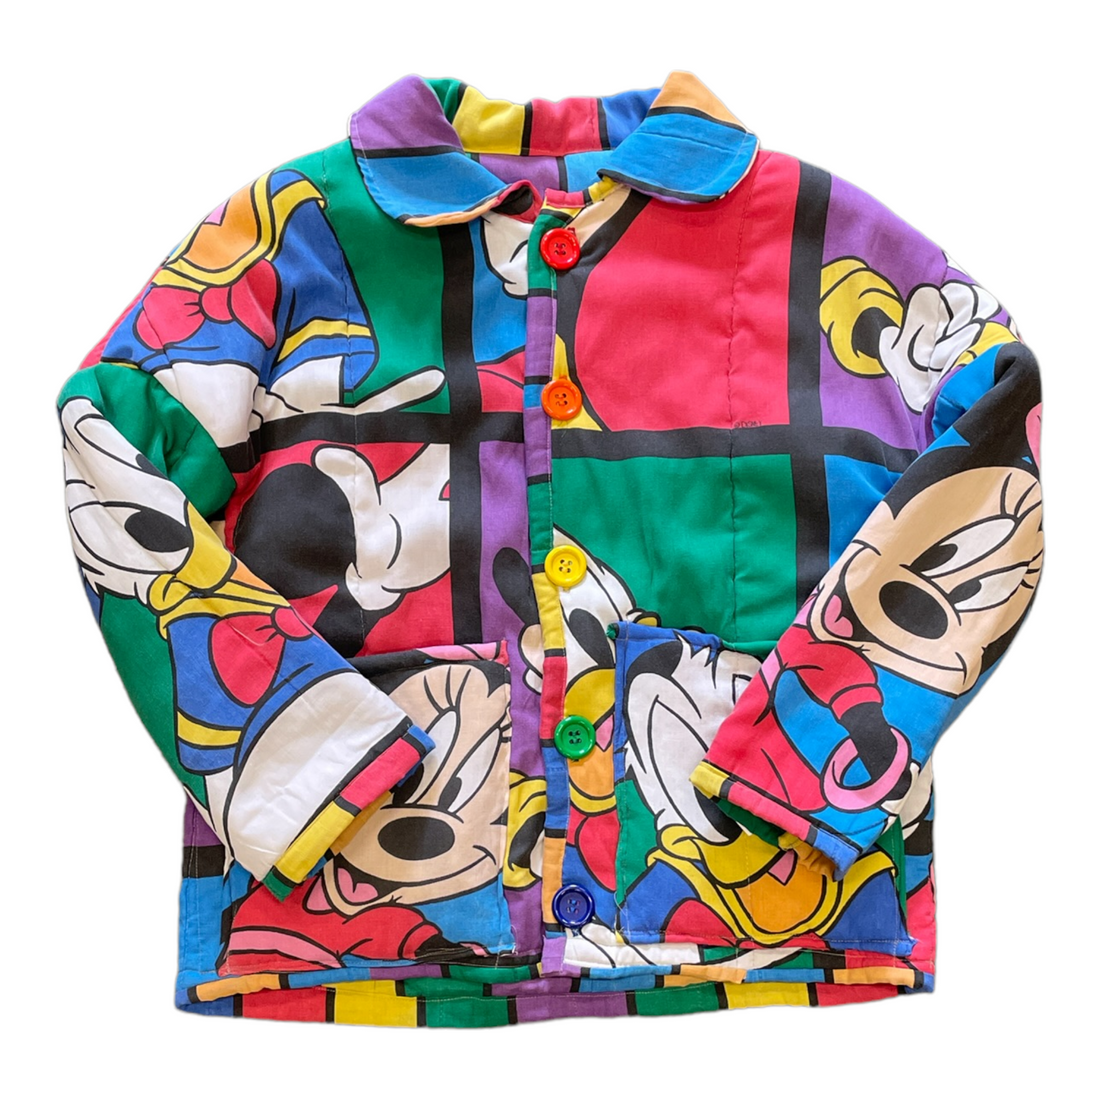 CUSTOM MADE MICKEY MOUSE CHORE COAT MULTICOLORED ‘LARGE’ - 1990S